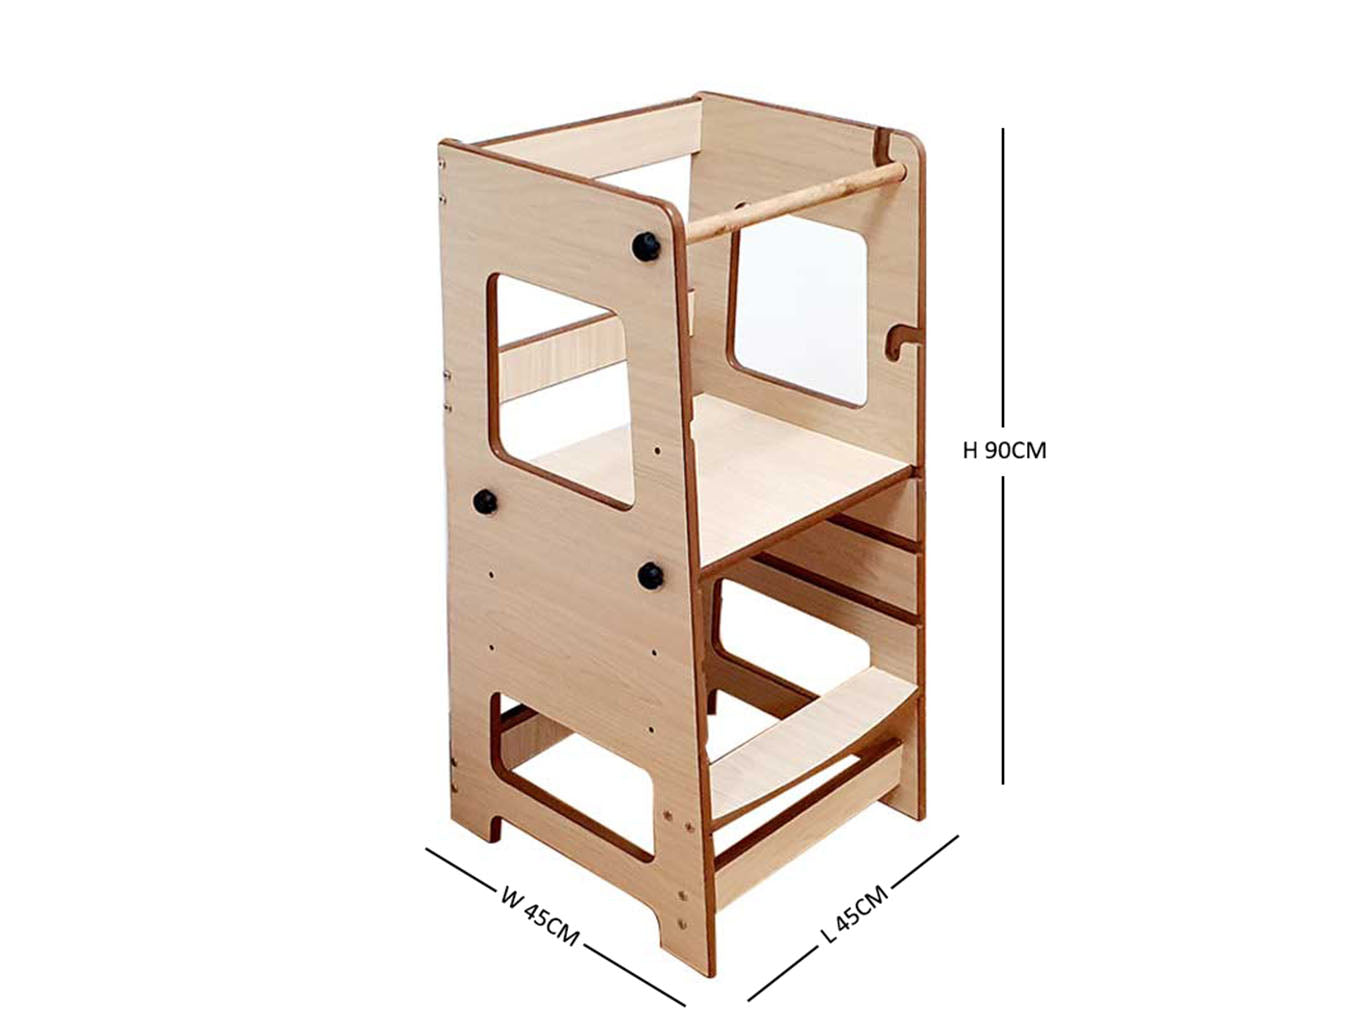 CHALT2 - Adjustable Learning Tower with size 1